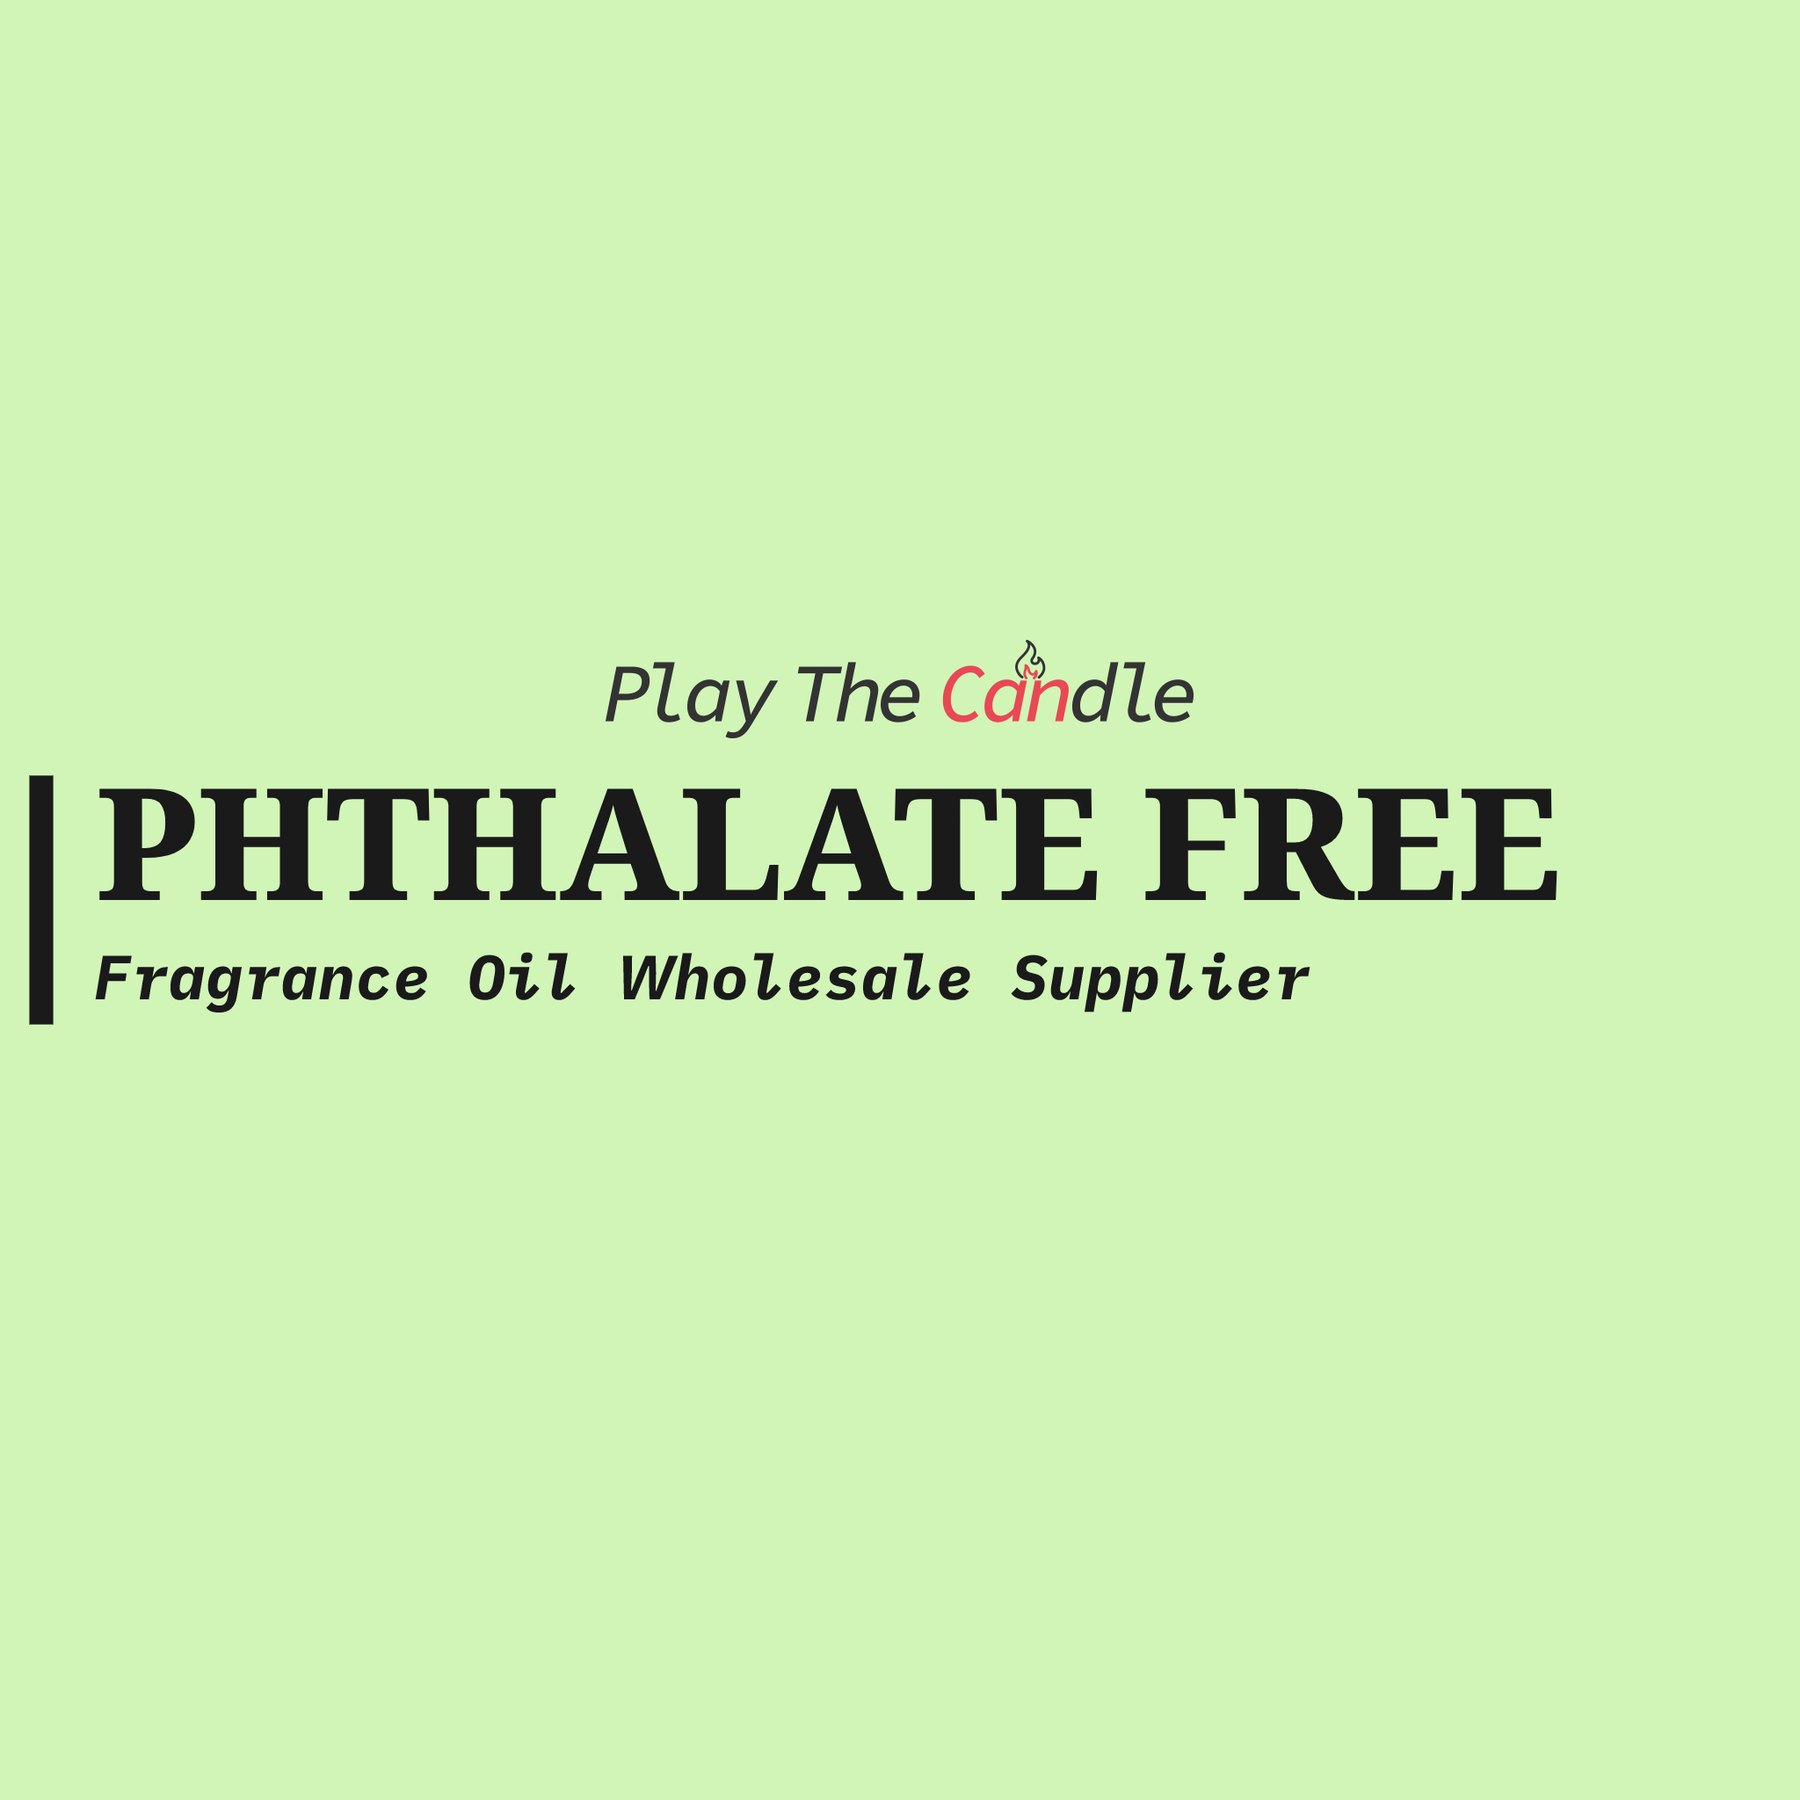 Fragrance Oil Phthalate Free Play The Candle